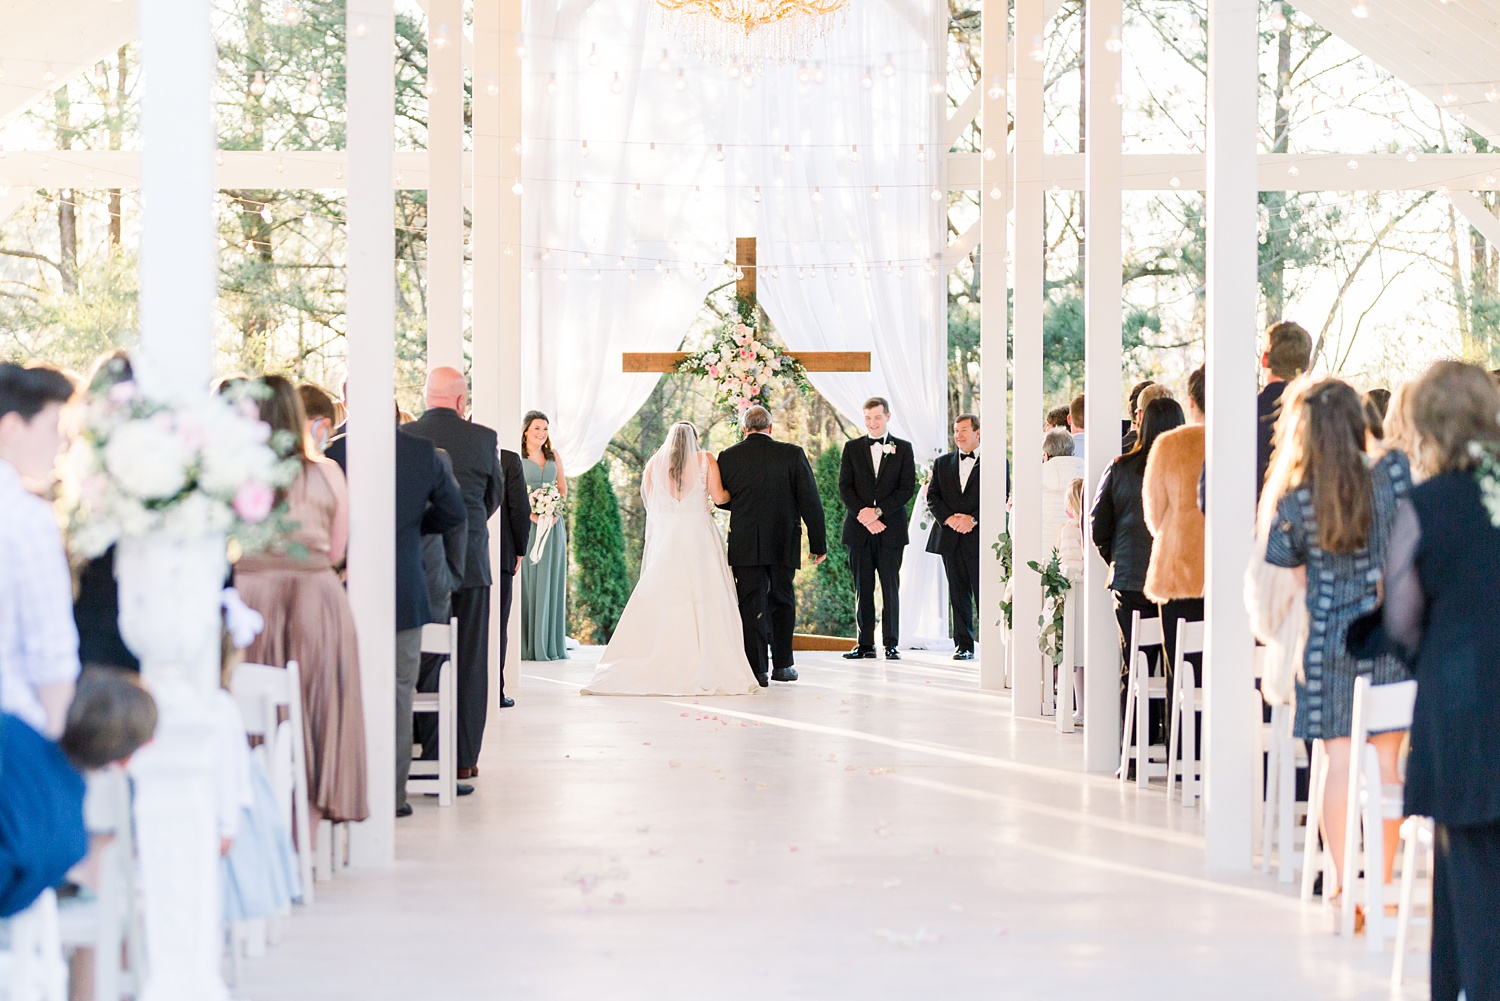 Camelot Manor wedding ceremony outside with wooden cross